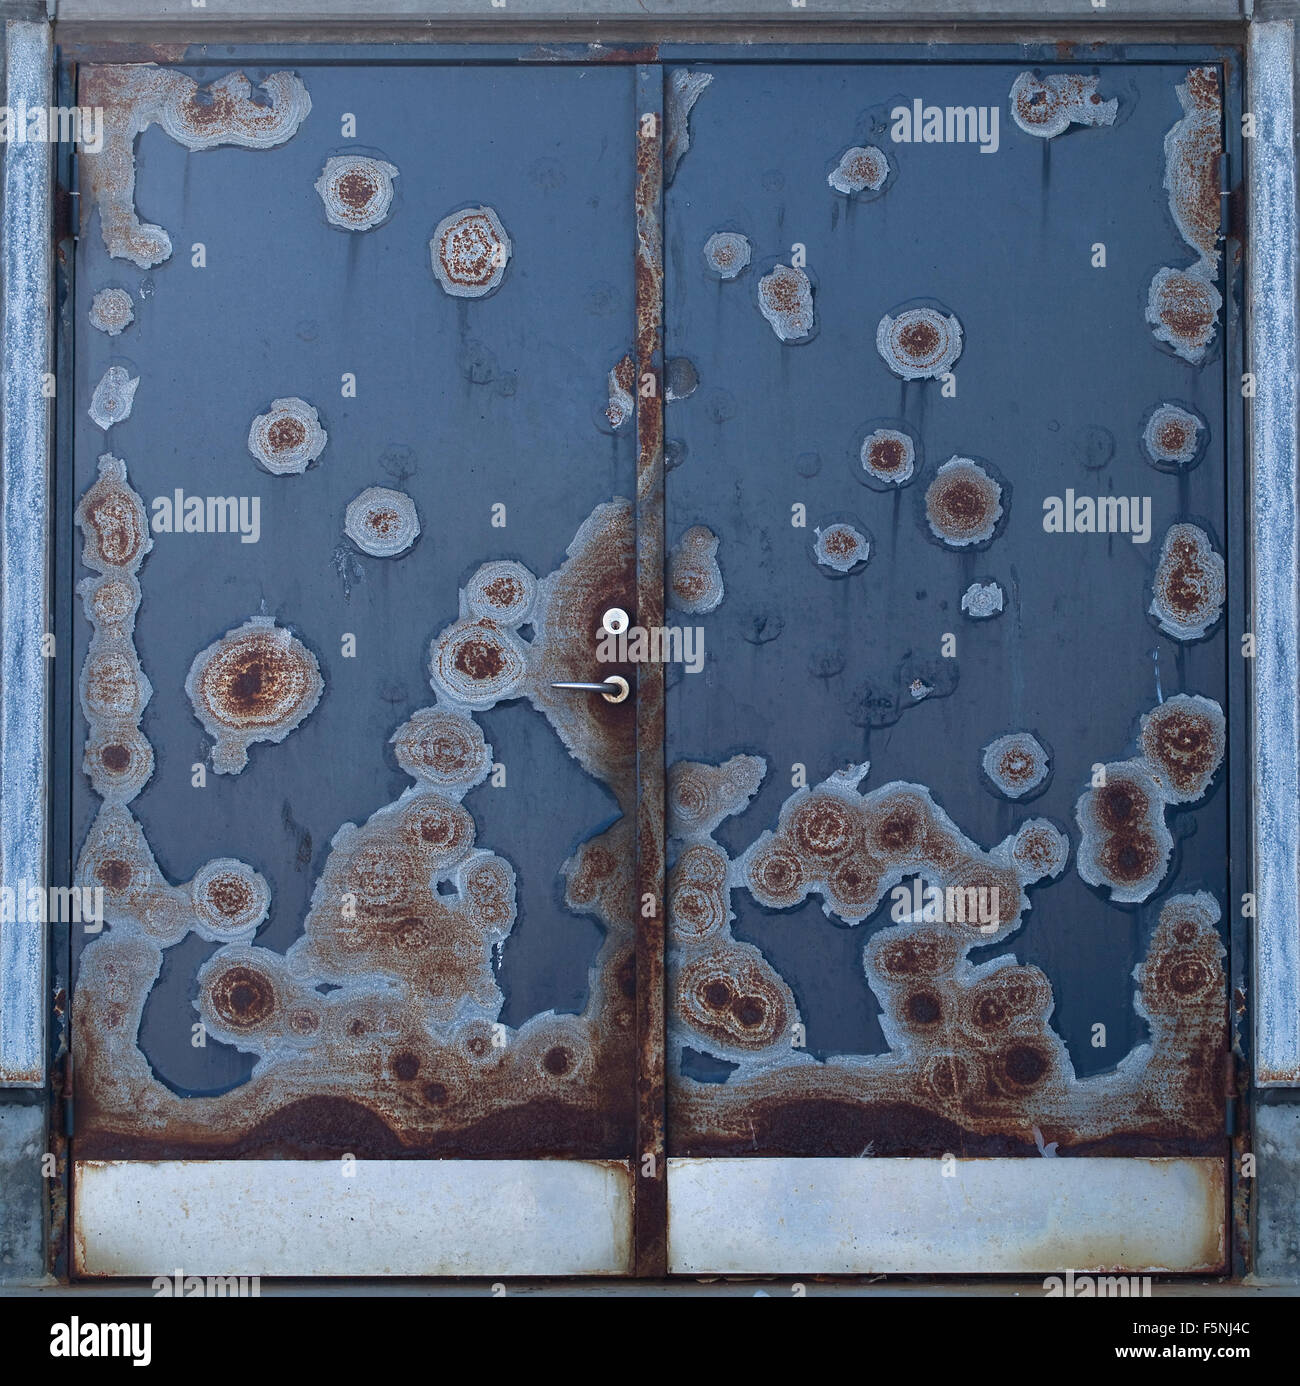 Doors to a commercial freezer have become battered over the years of use.The resulting damage is an interesting abstract pattern Stock Photo